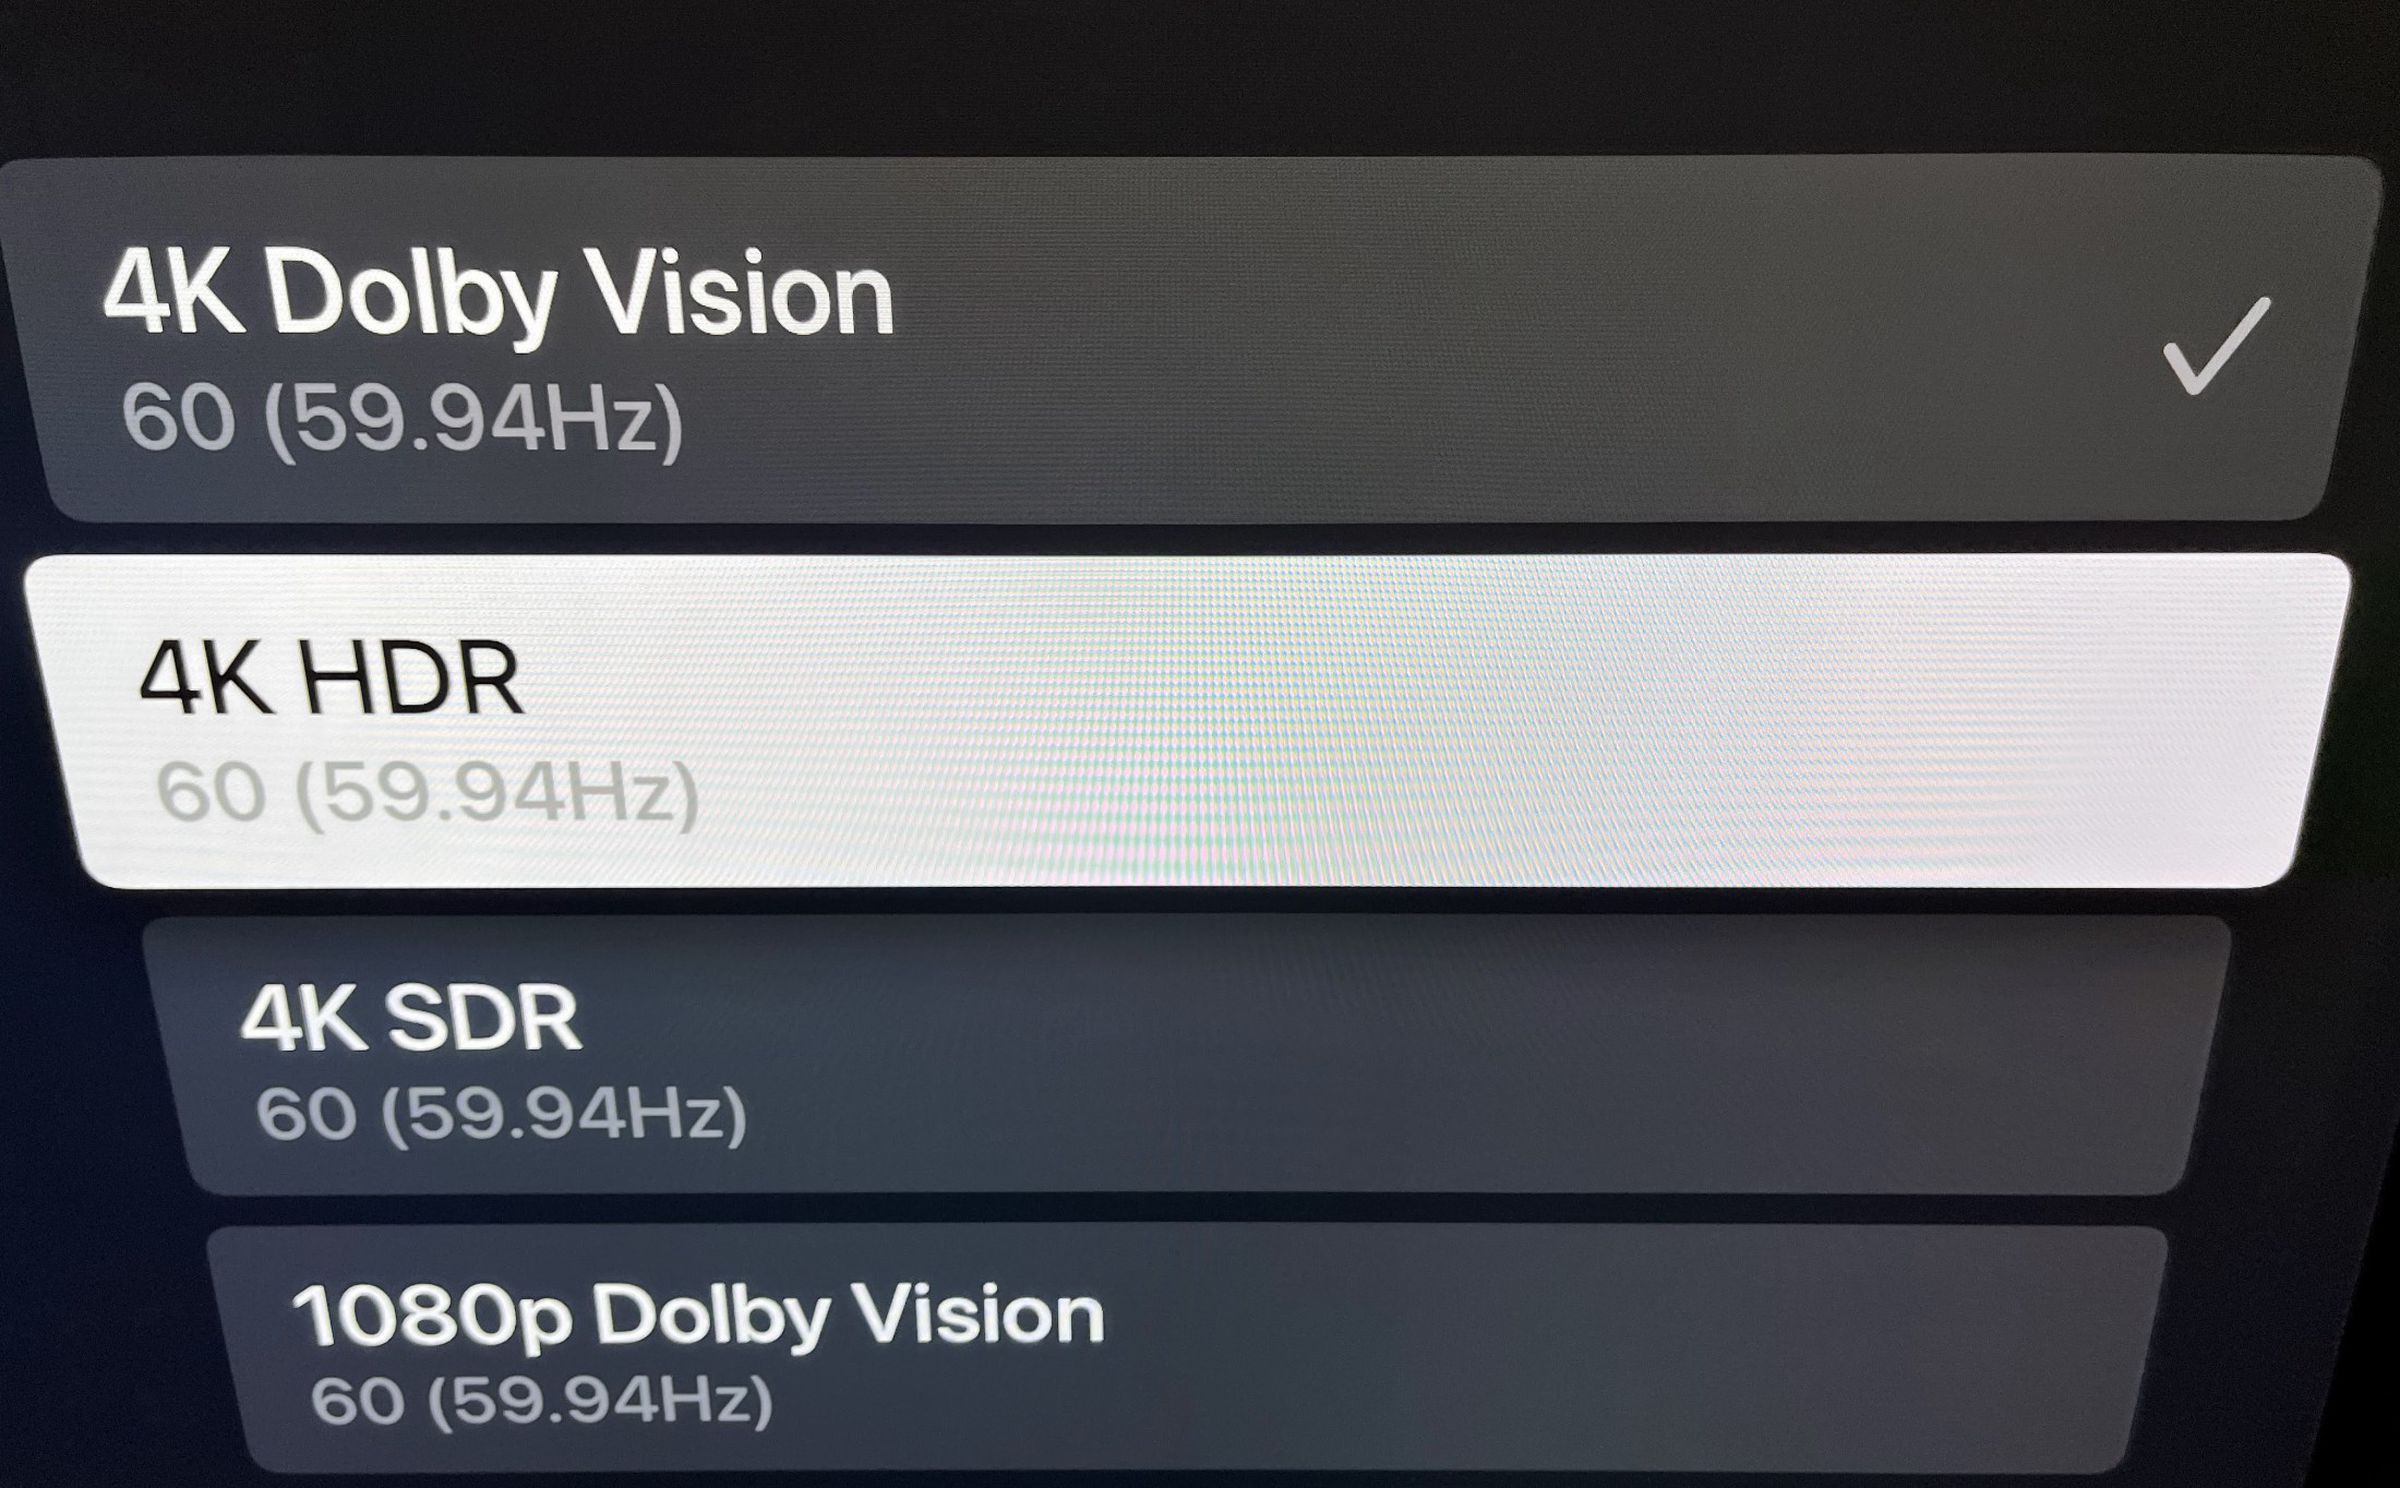 Screenshot of a TV menu showing several options: 4K Dolby Vision, 4K HDR, 4K SDR, and 1080p Dolby Vision. 4K HDR is highlighted.